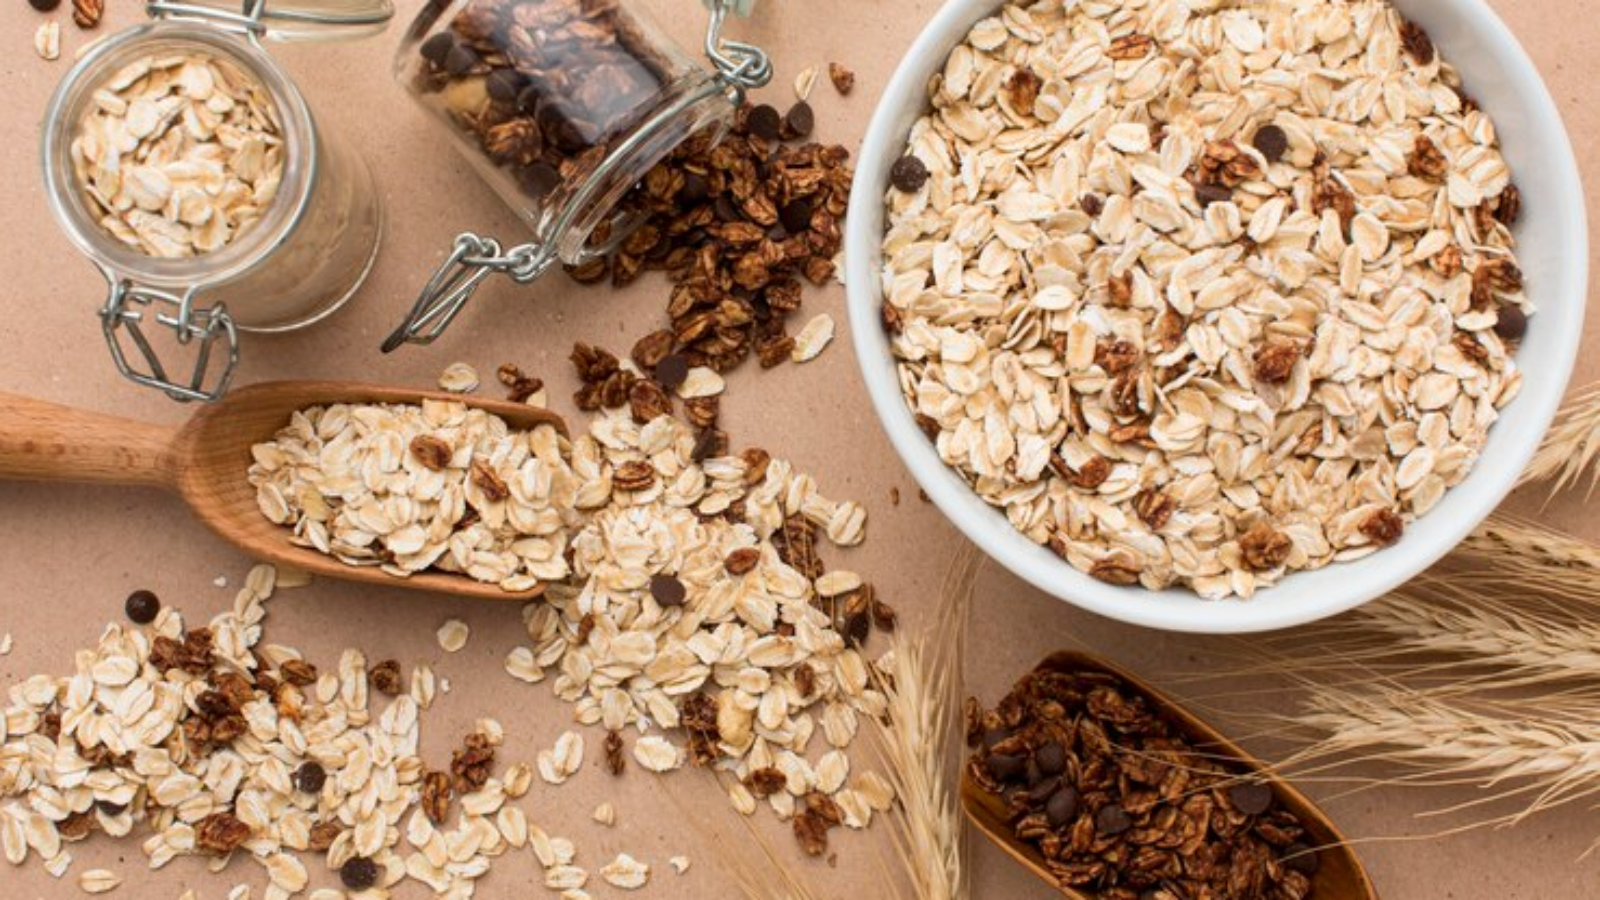 top-view-cereal-mix_23-2148604105-jpg-740×493-